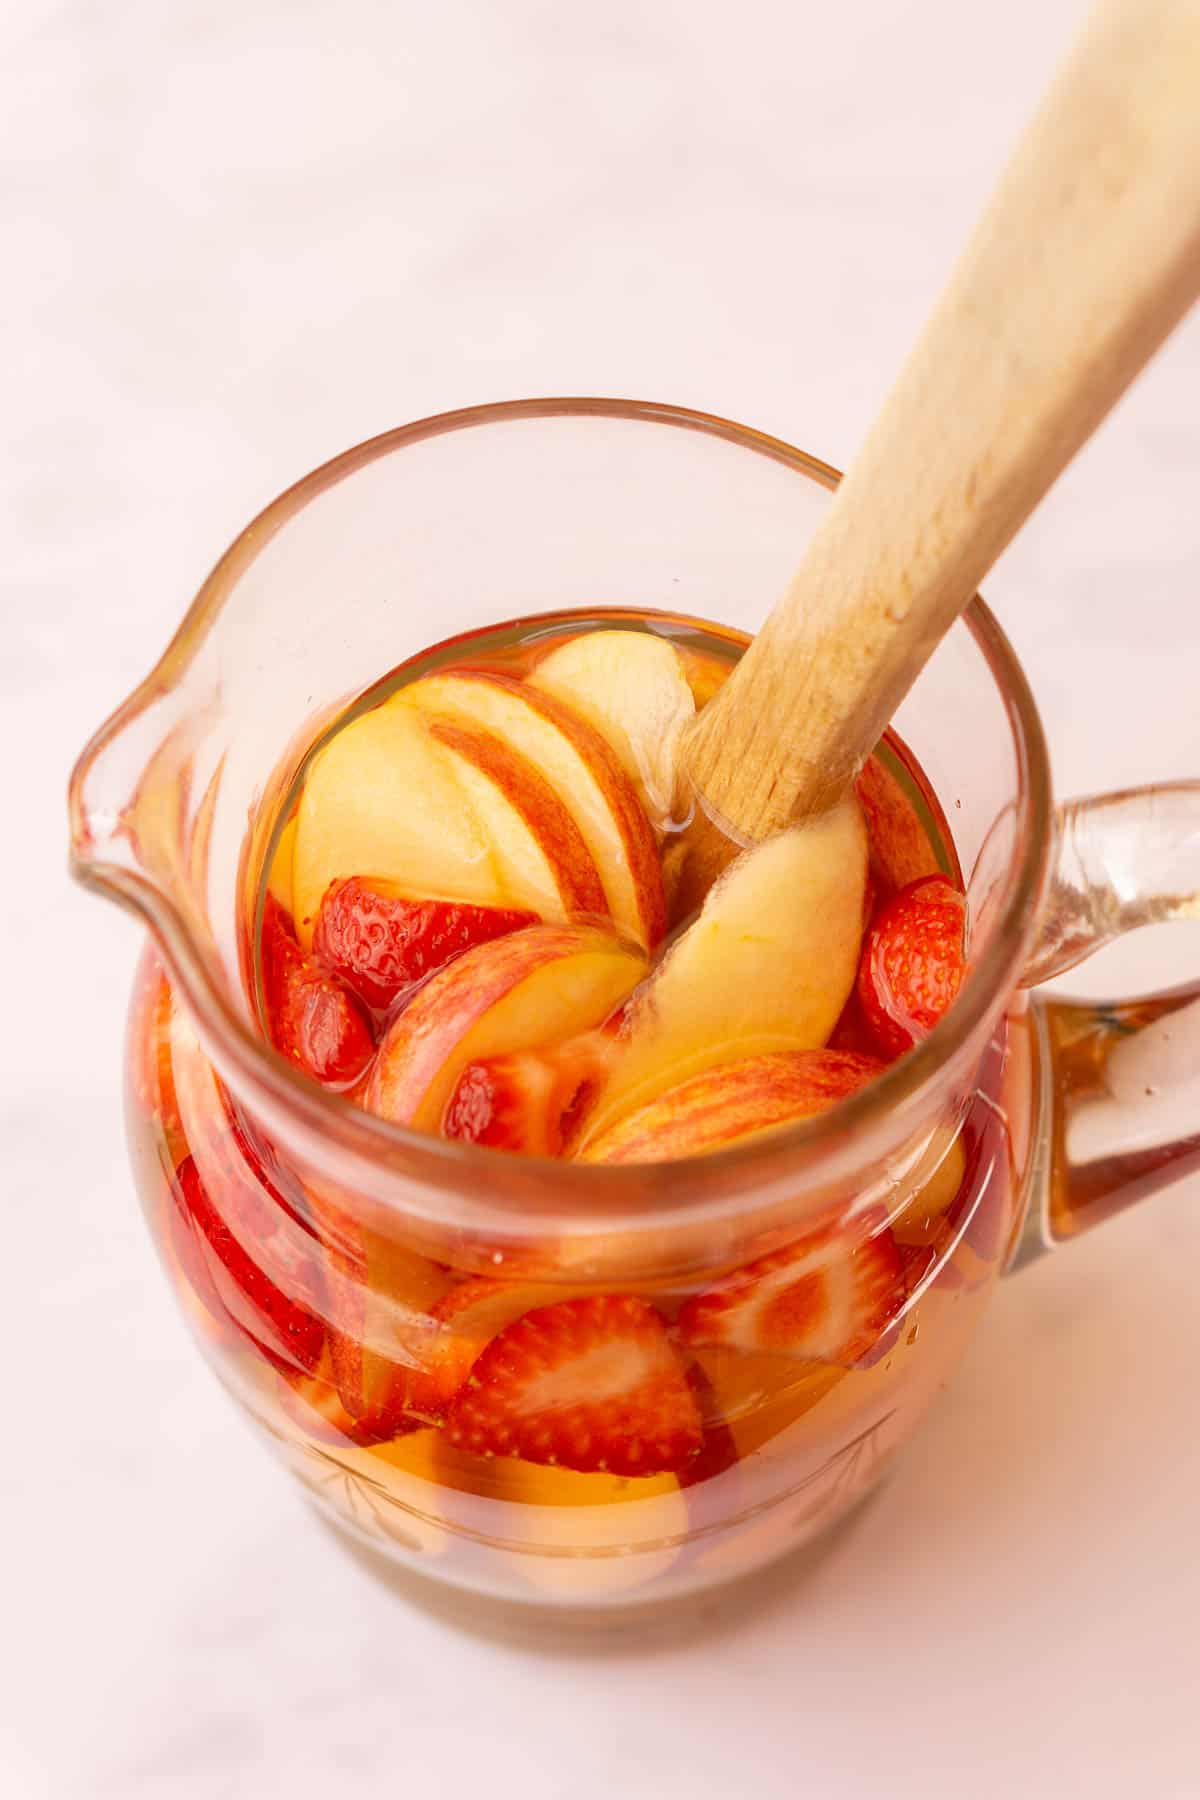 Pitcher of white wine sangria filled with different fruits and with a wooden spoon.